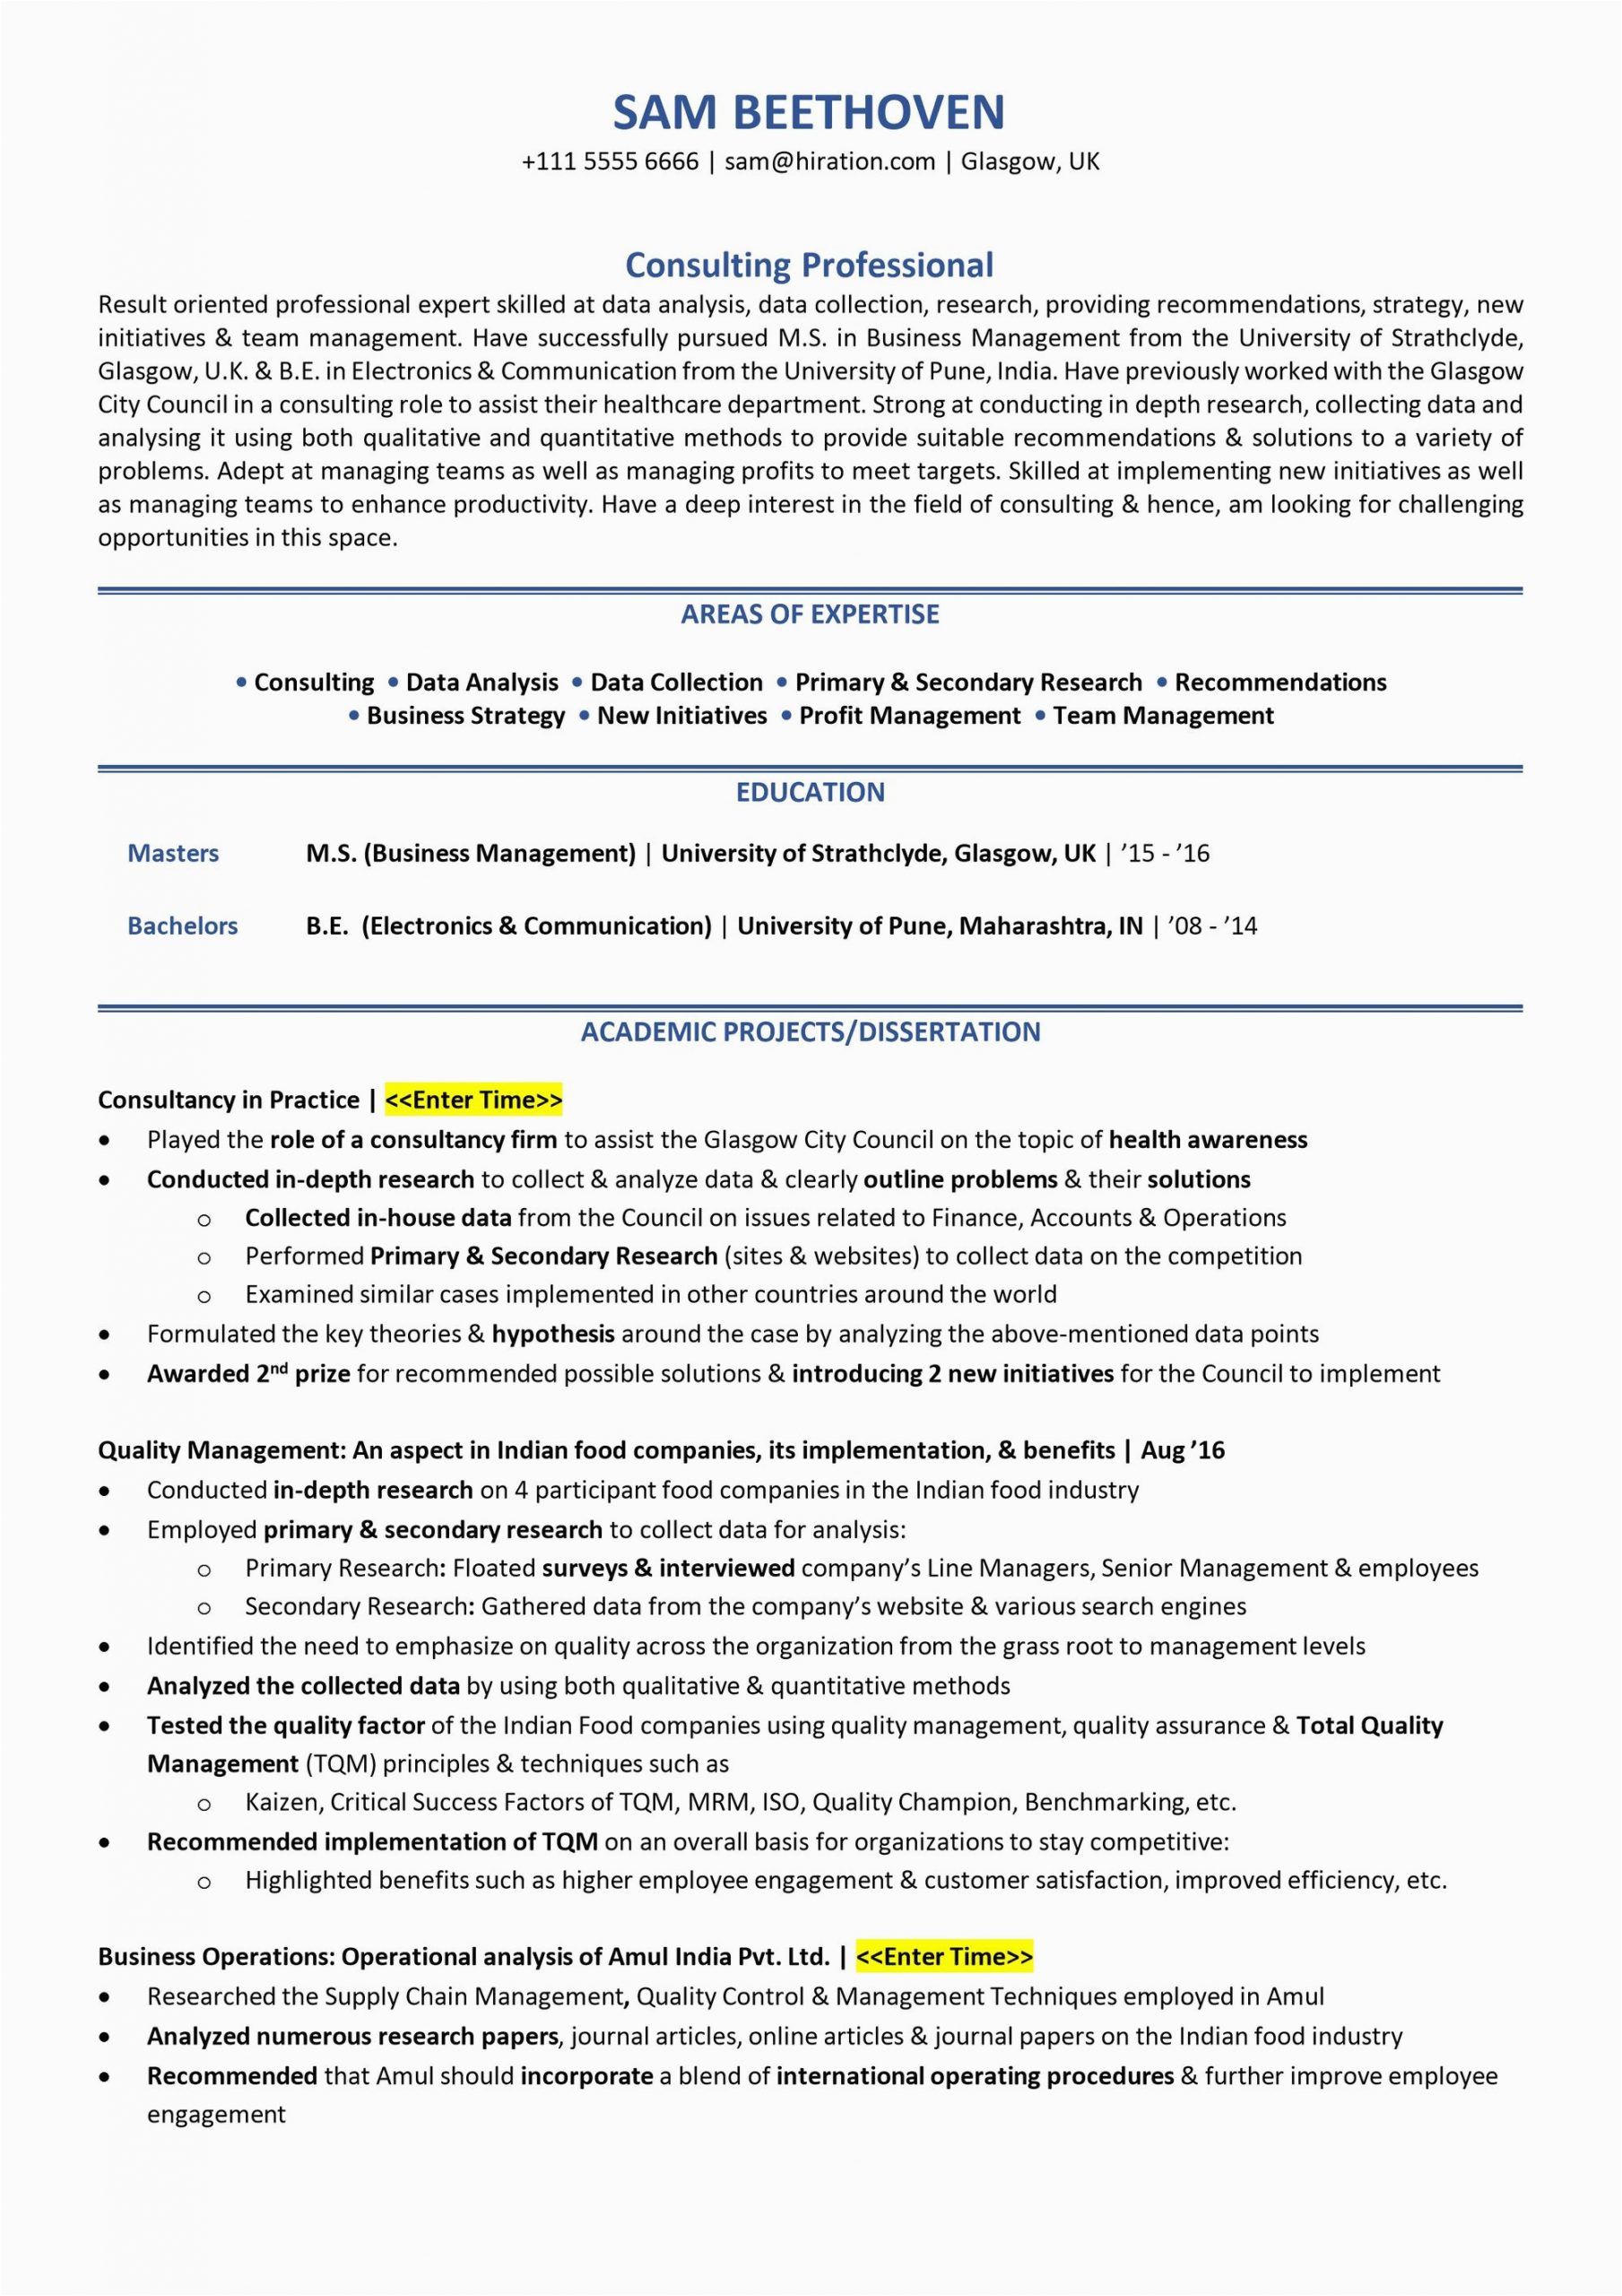 Sample Job Resume for College Student Student Resume [2019] Guide to College Student Resume